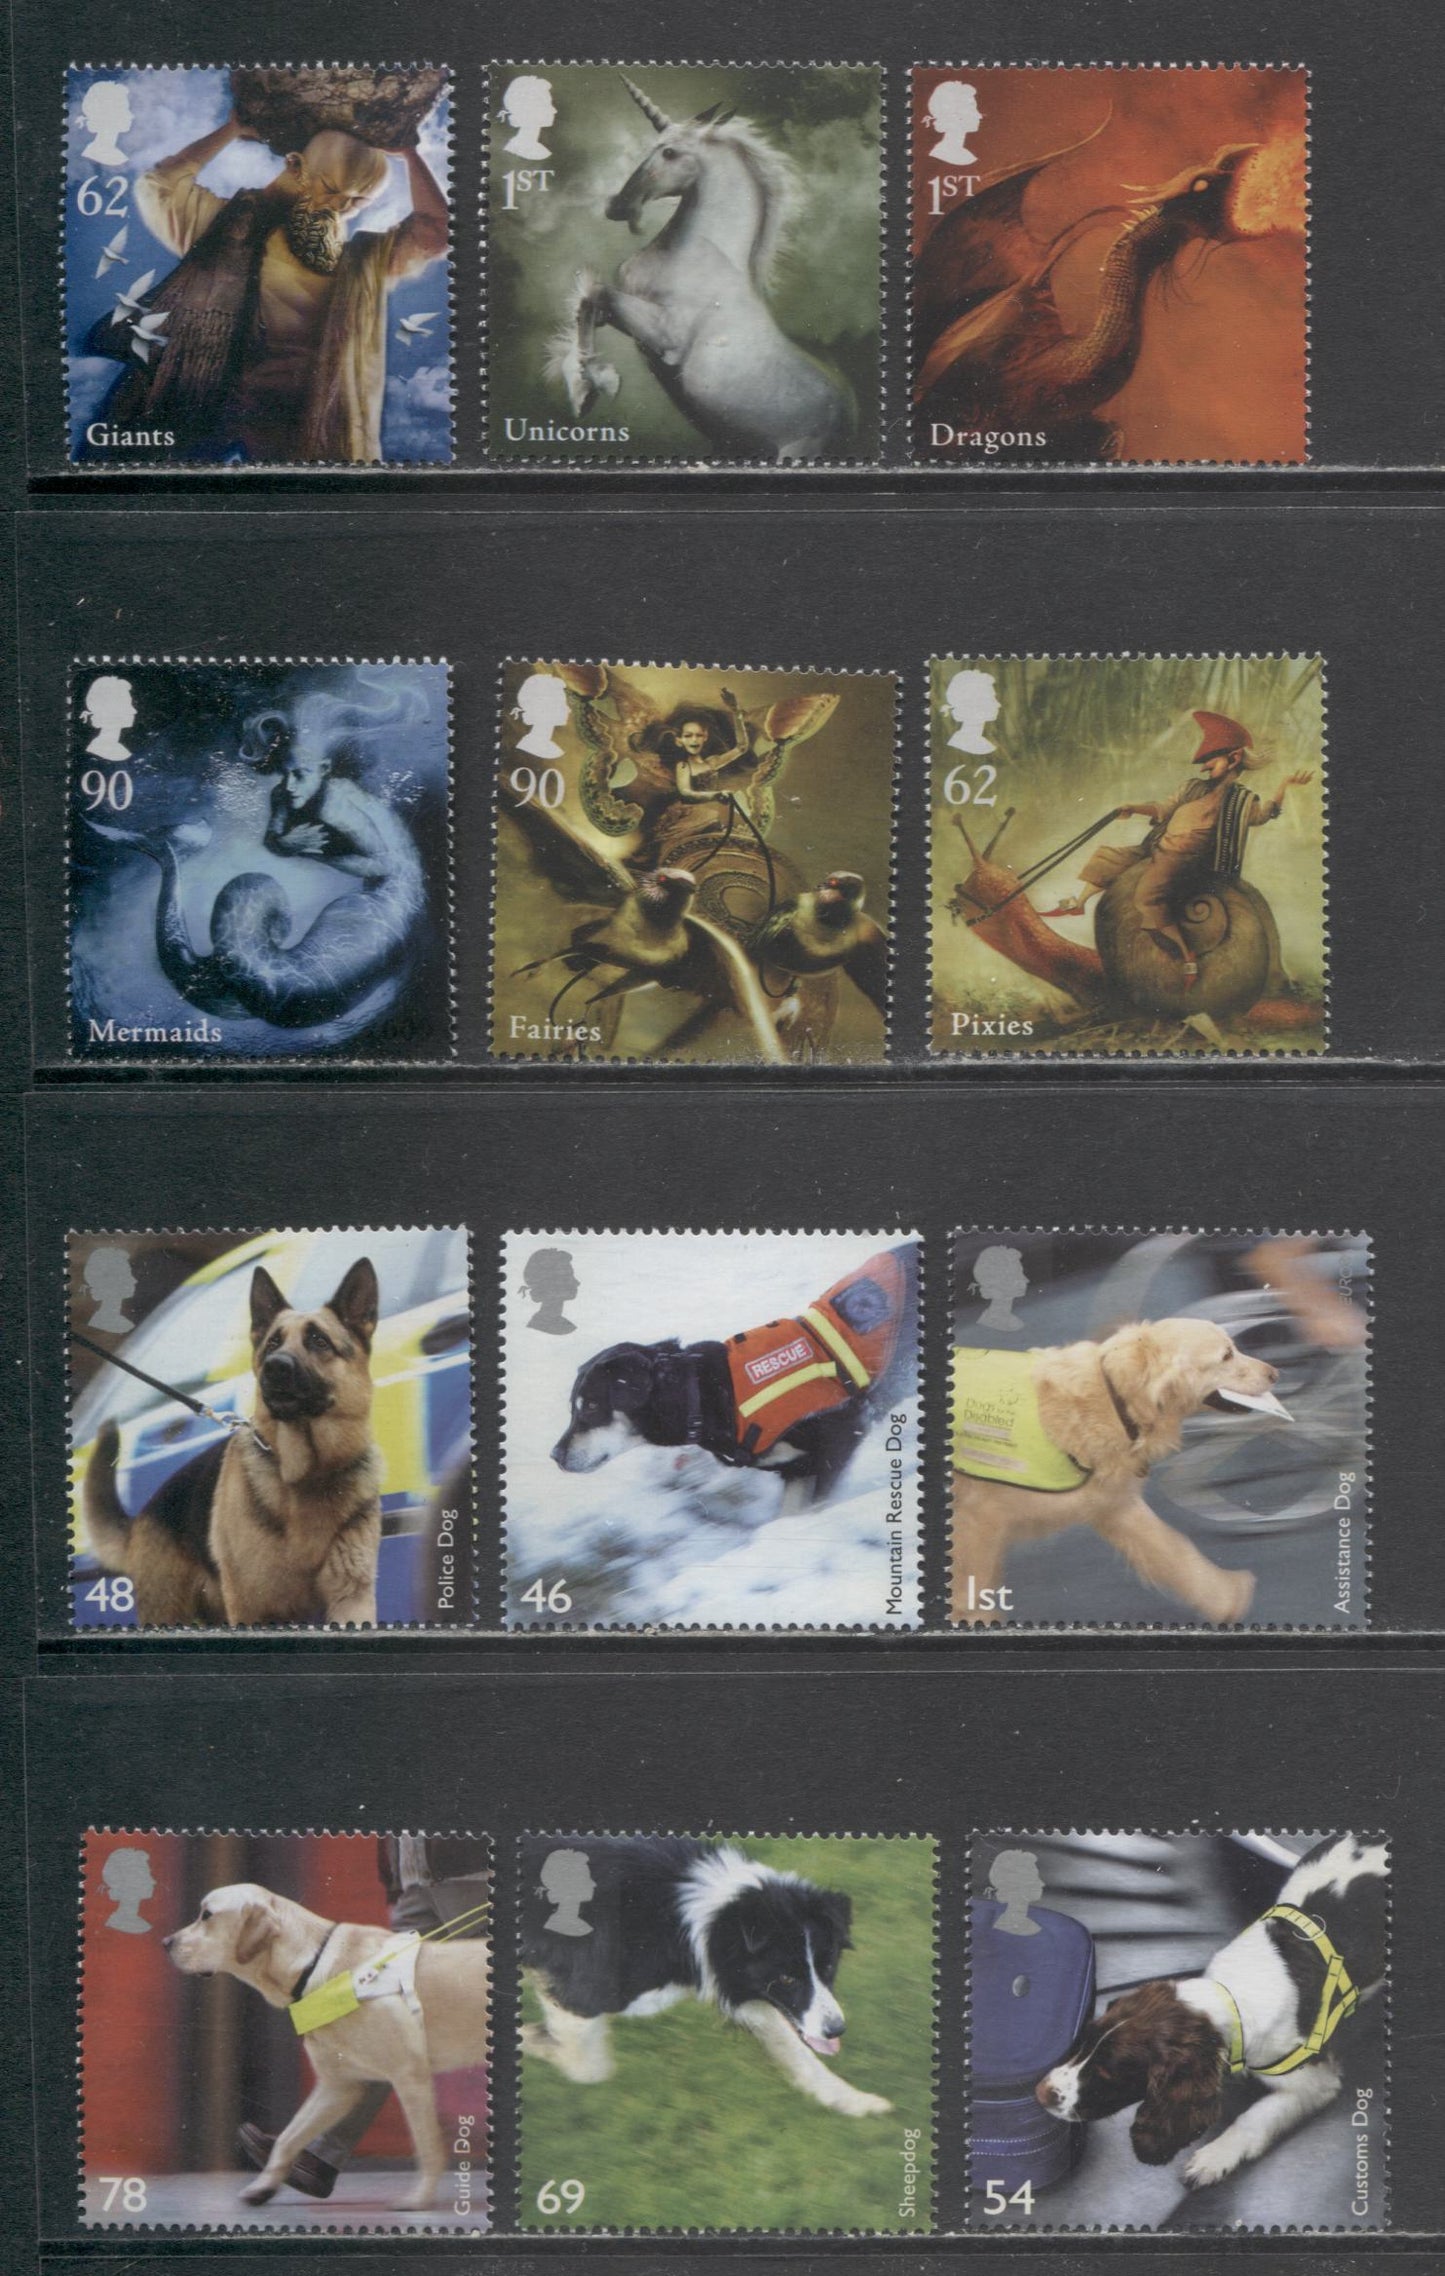 Lot 21 Great Britain SC#2539/2678 2008-2009 Working Dogs - Mythical Creatures Issues, 11 VFNH Singles, Click on Listing to See ALL Pictures, 2017 Scott Cat. $26.95